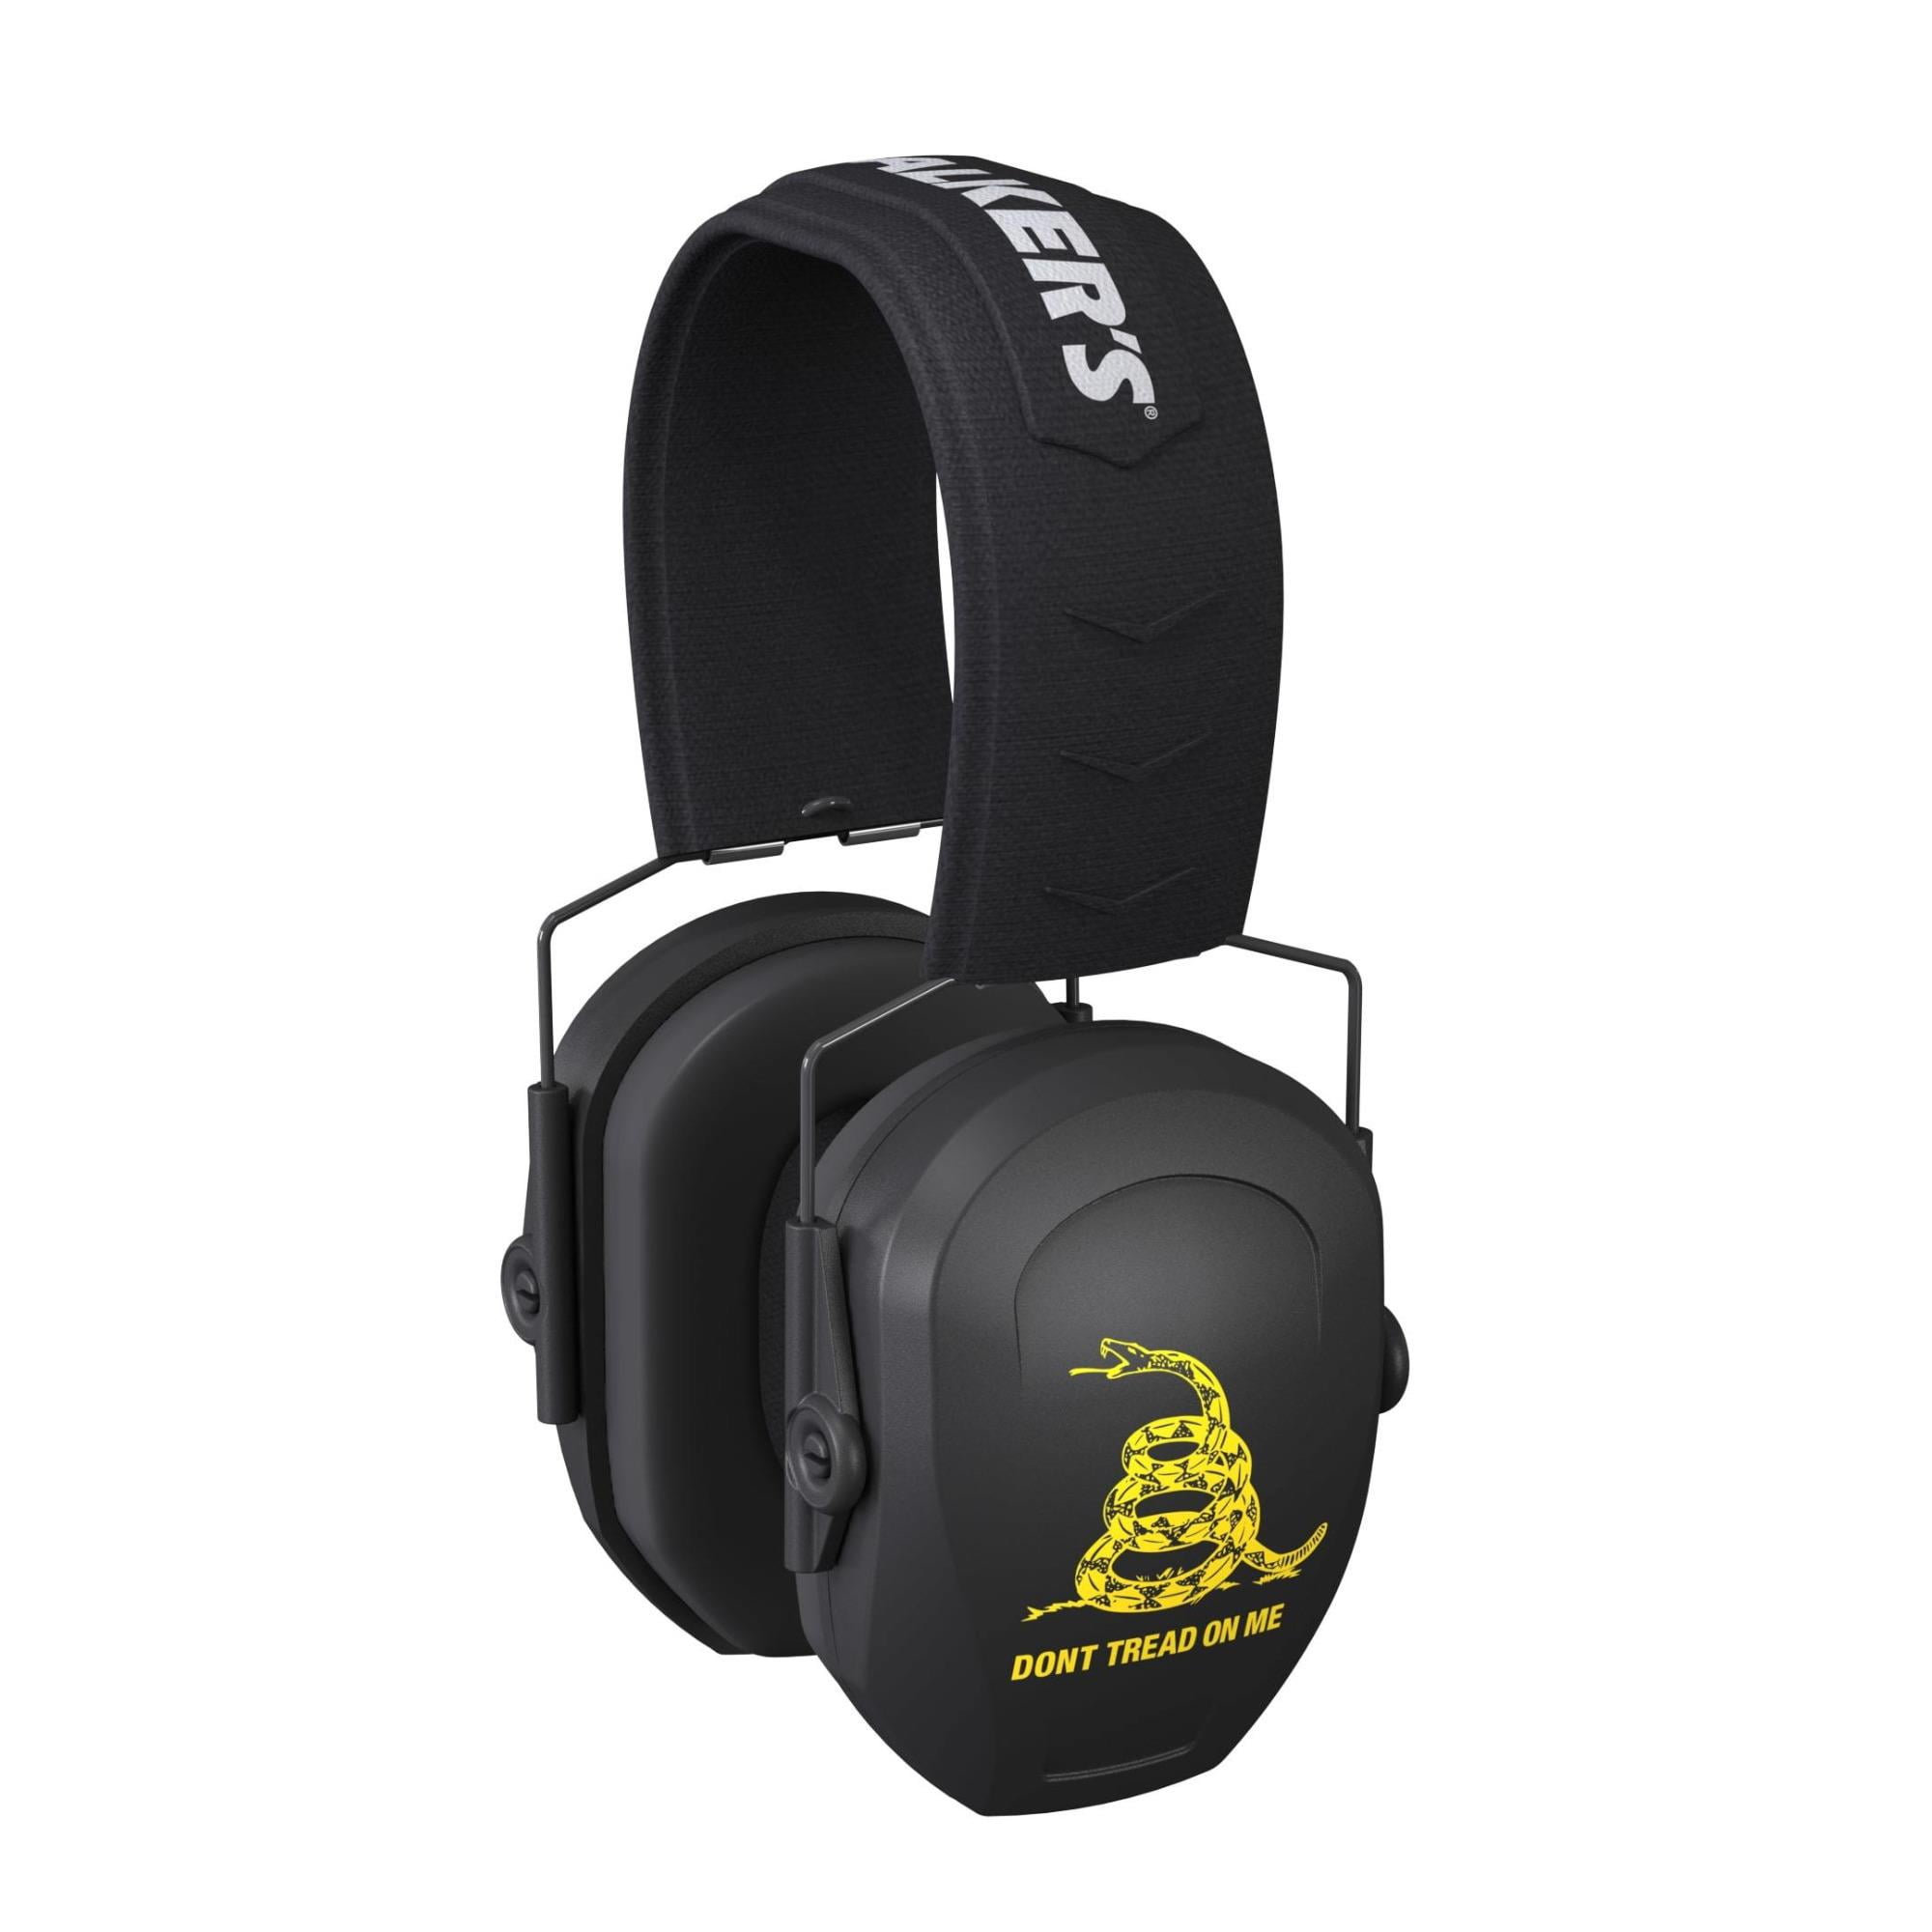 WALKER'S PRO LOW PROFILE Muff Hearing Protection Perfect for Shooting Range NWT 